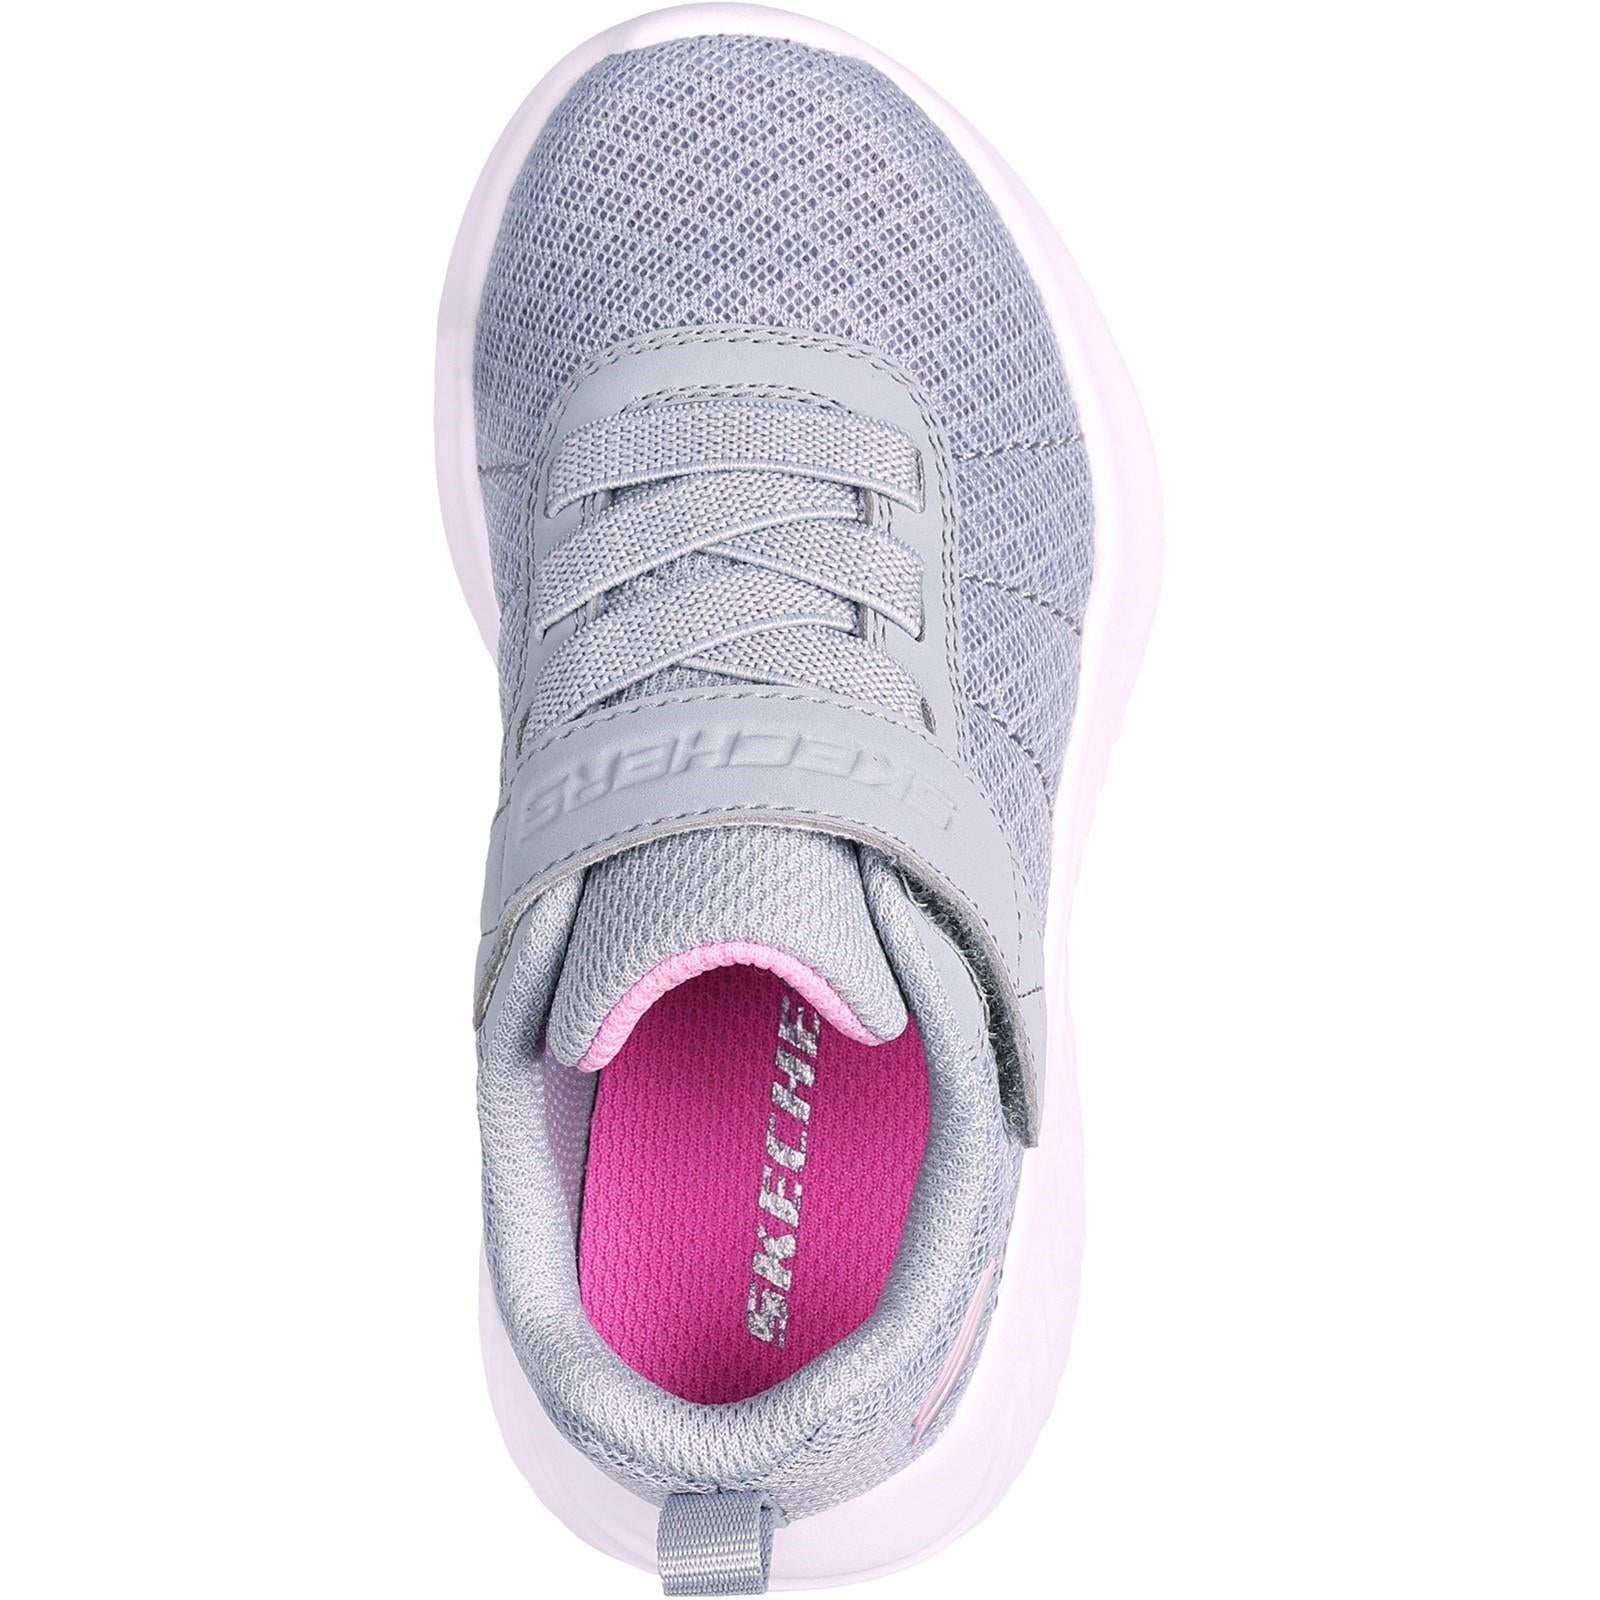 Skechers Bounder - Cool Cruise Shoe